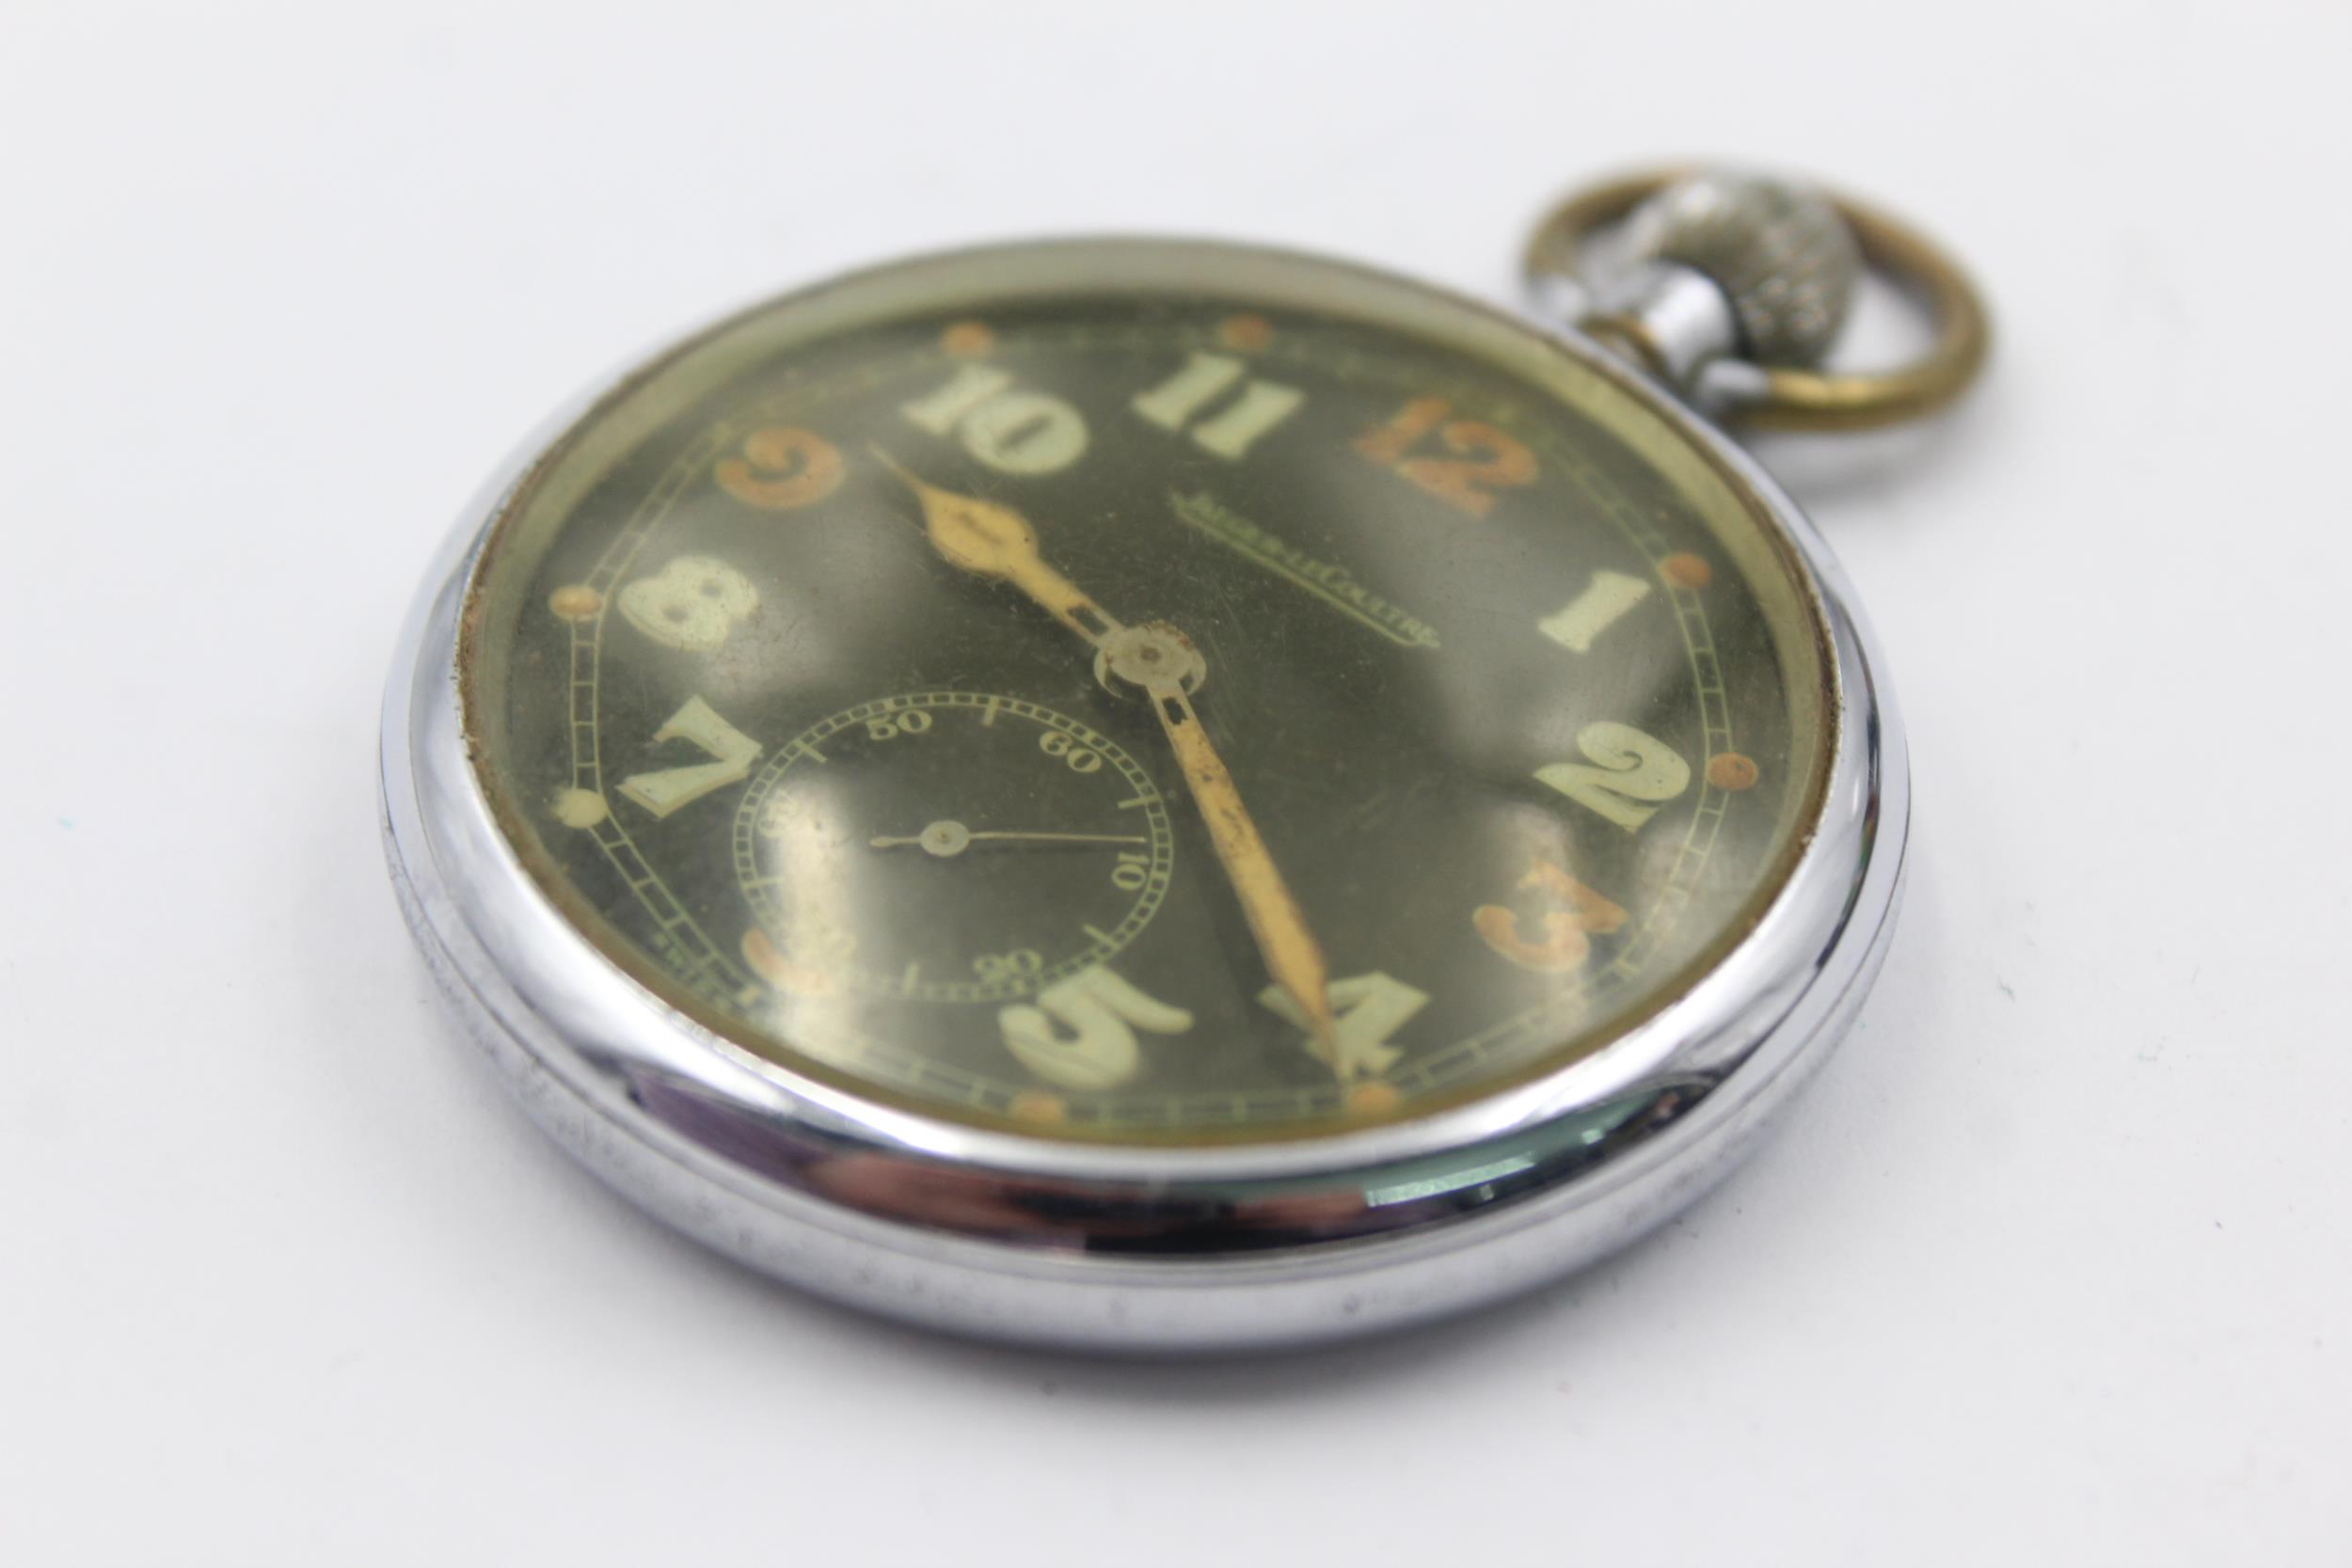 Vintage Gents JAEGER-LECOULTRE WWII G.S.T.P POCKET WATCH Hand-Wind WORKING - Image 3 of 5